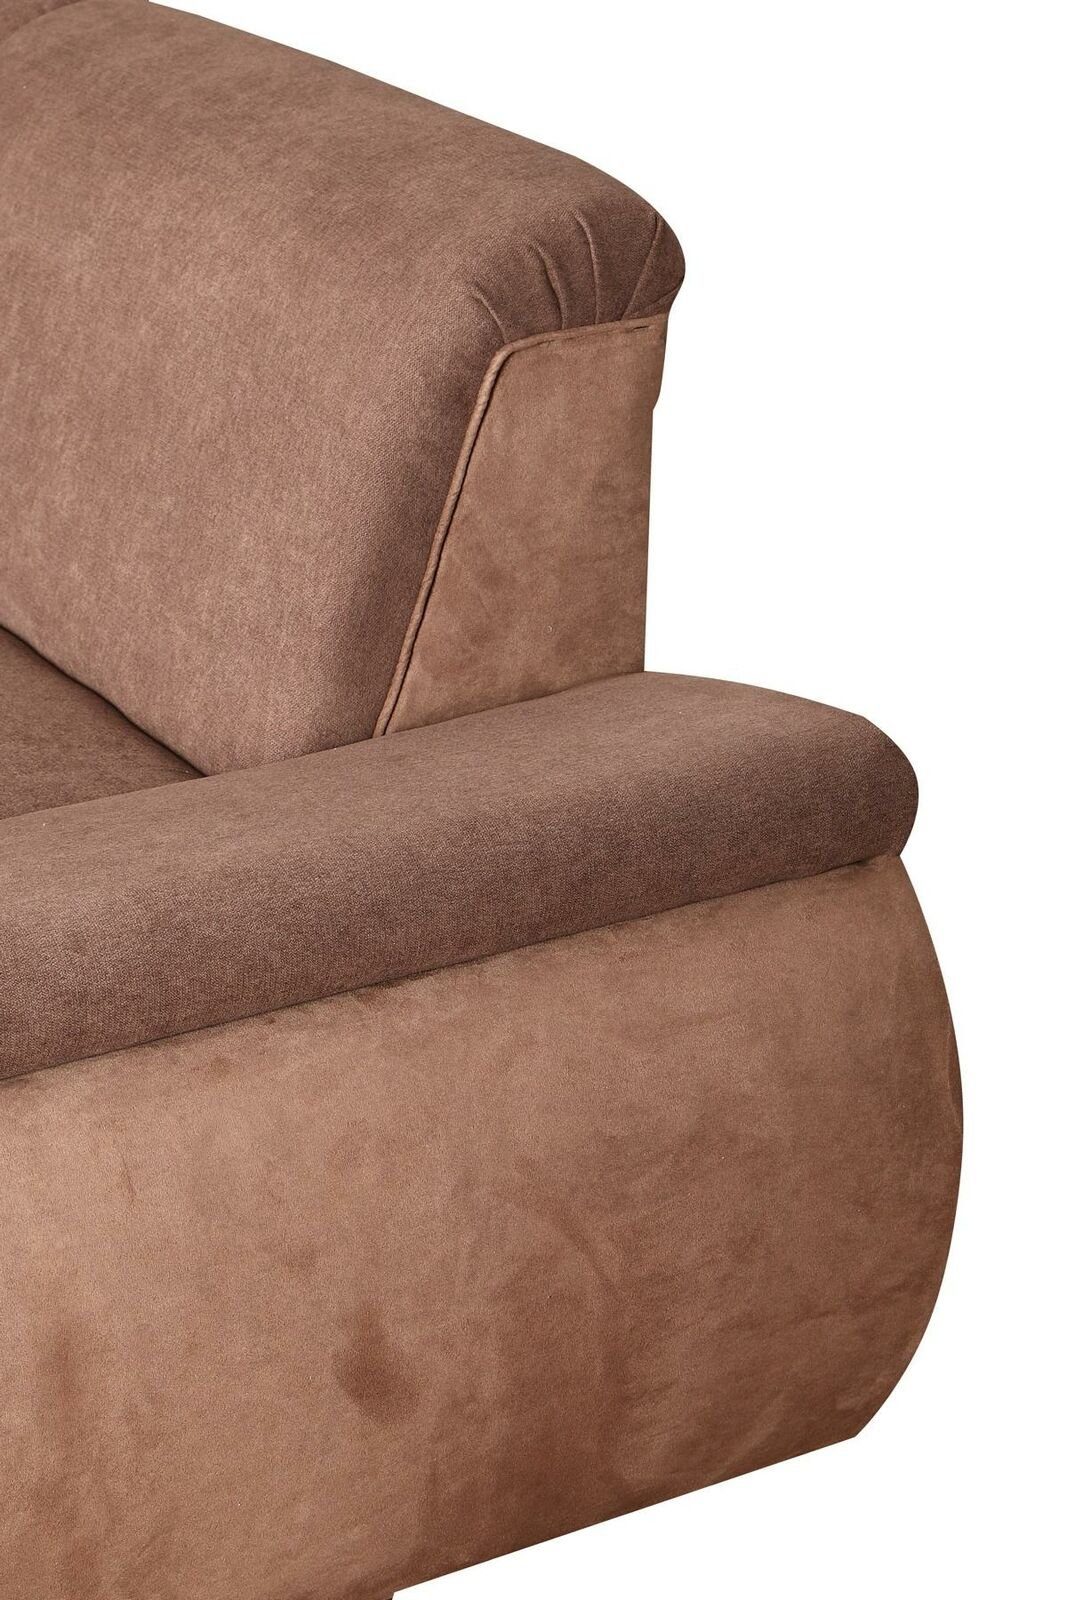 Design L-Form Stoff Europe Ecksofa JVmoebel Sofa Made Bettfunktion Sofa Couch, Couch mit in Braunes